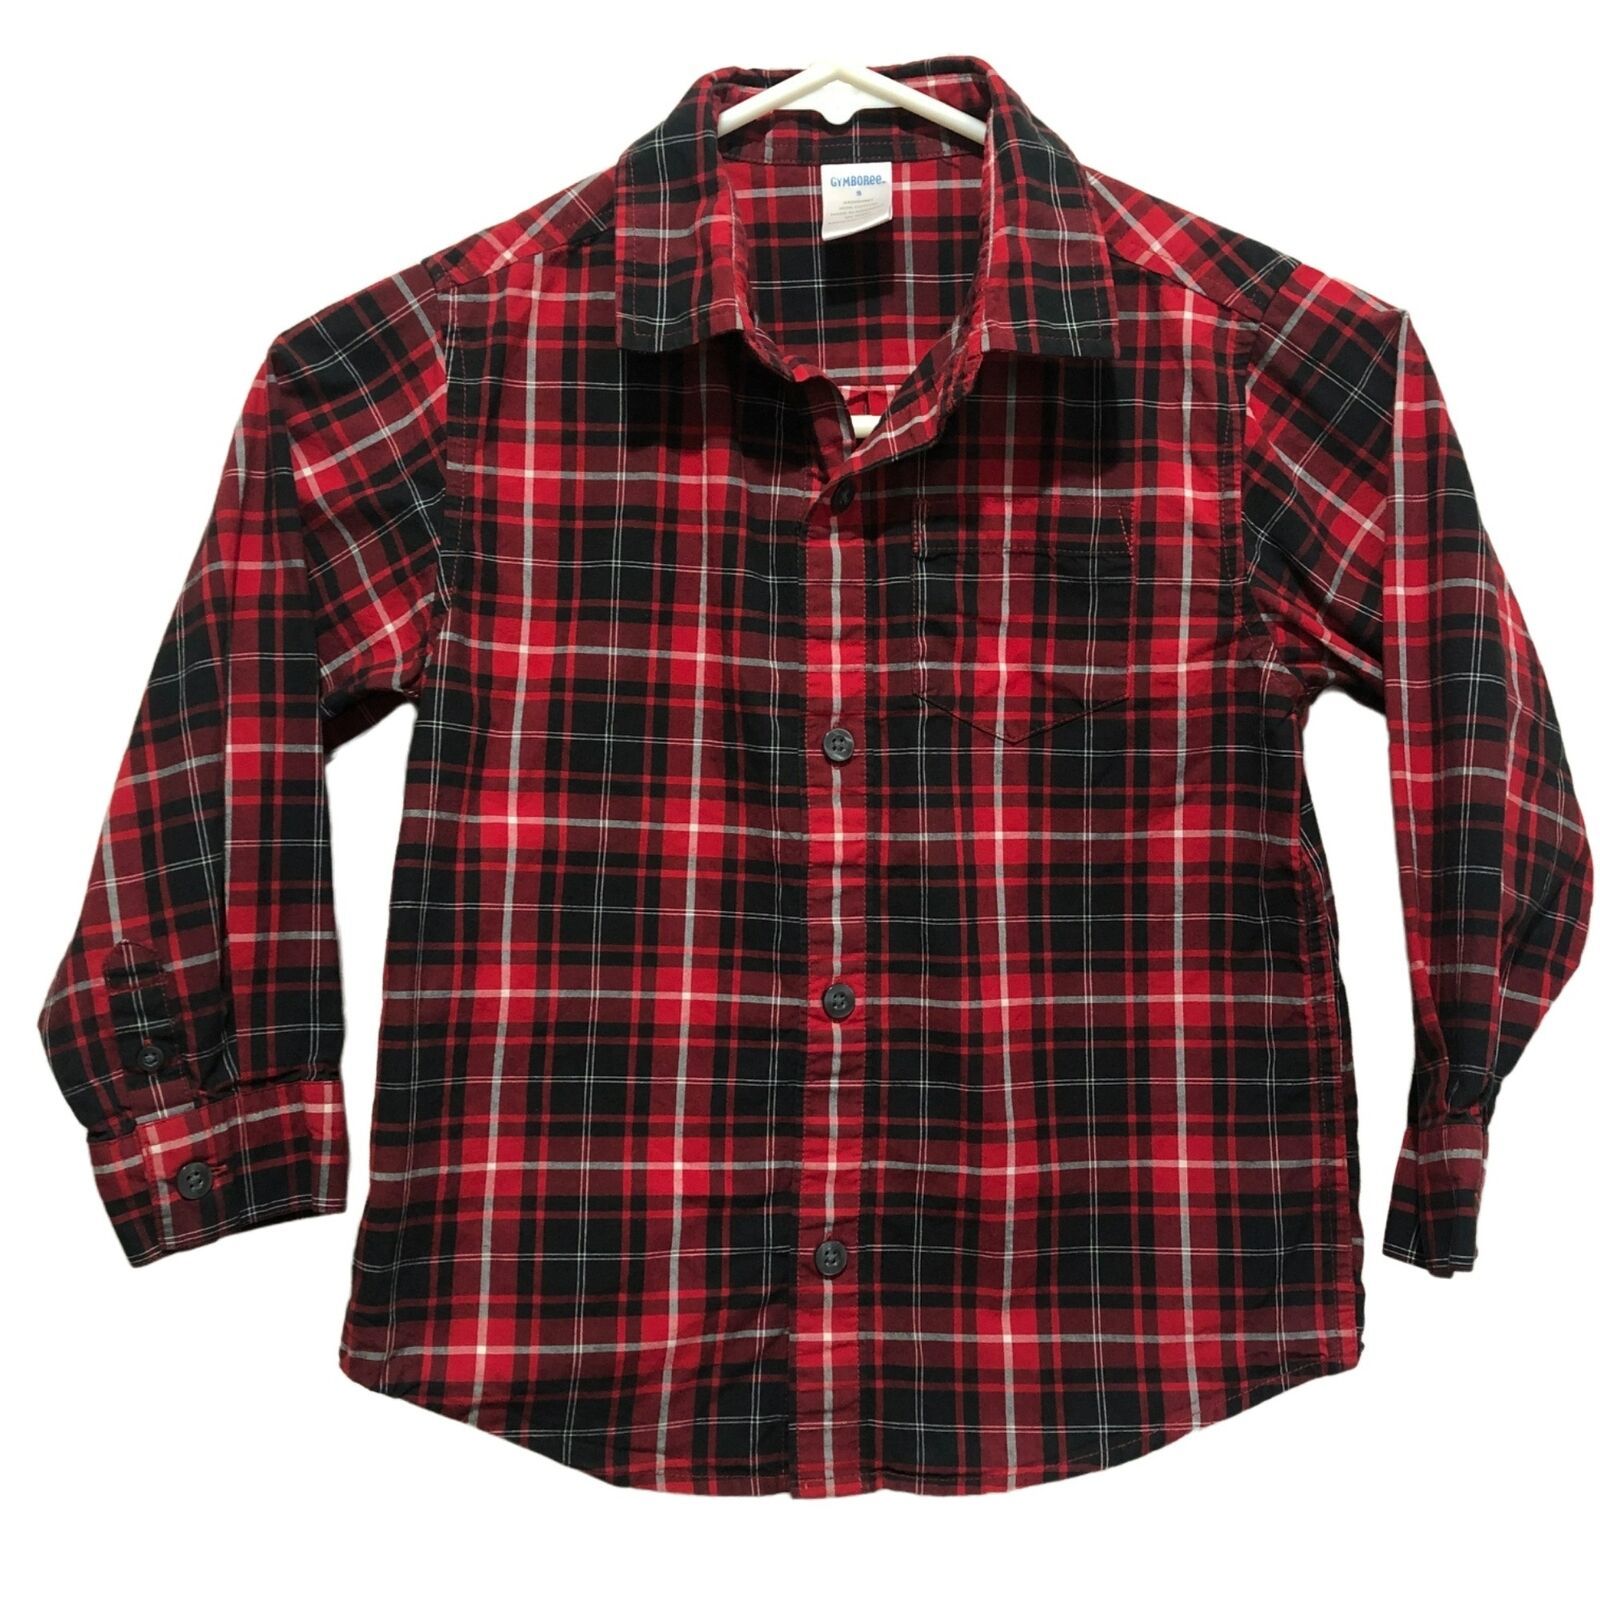 Gymboree Size 5 Boys Long Sleeve Red Plaid Button Up Shirt Holiday Christmas - $12.00